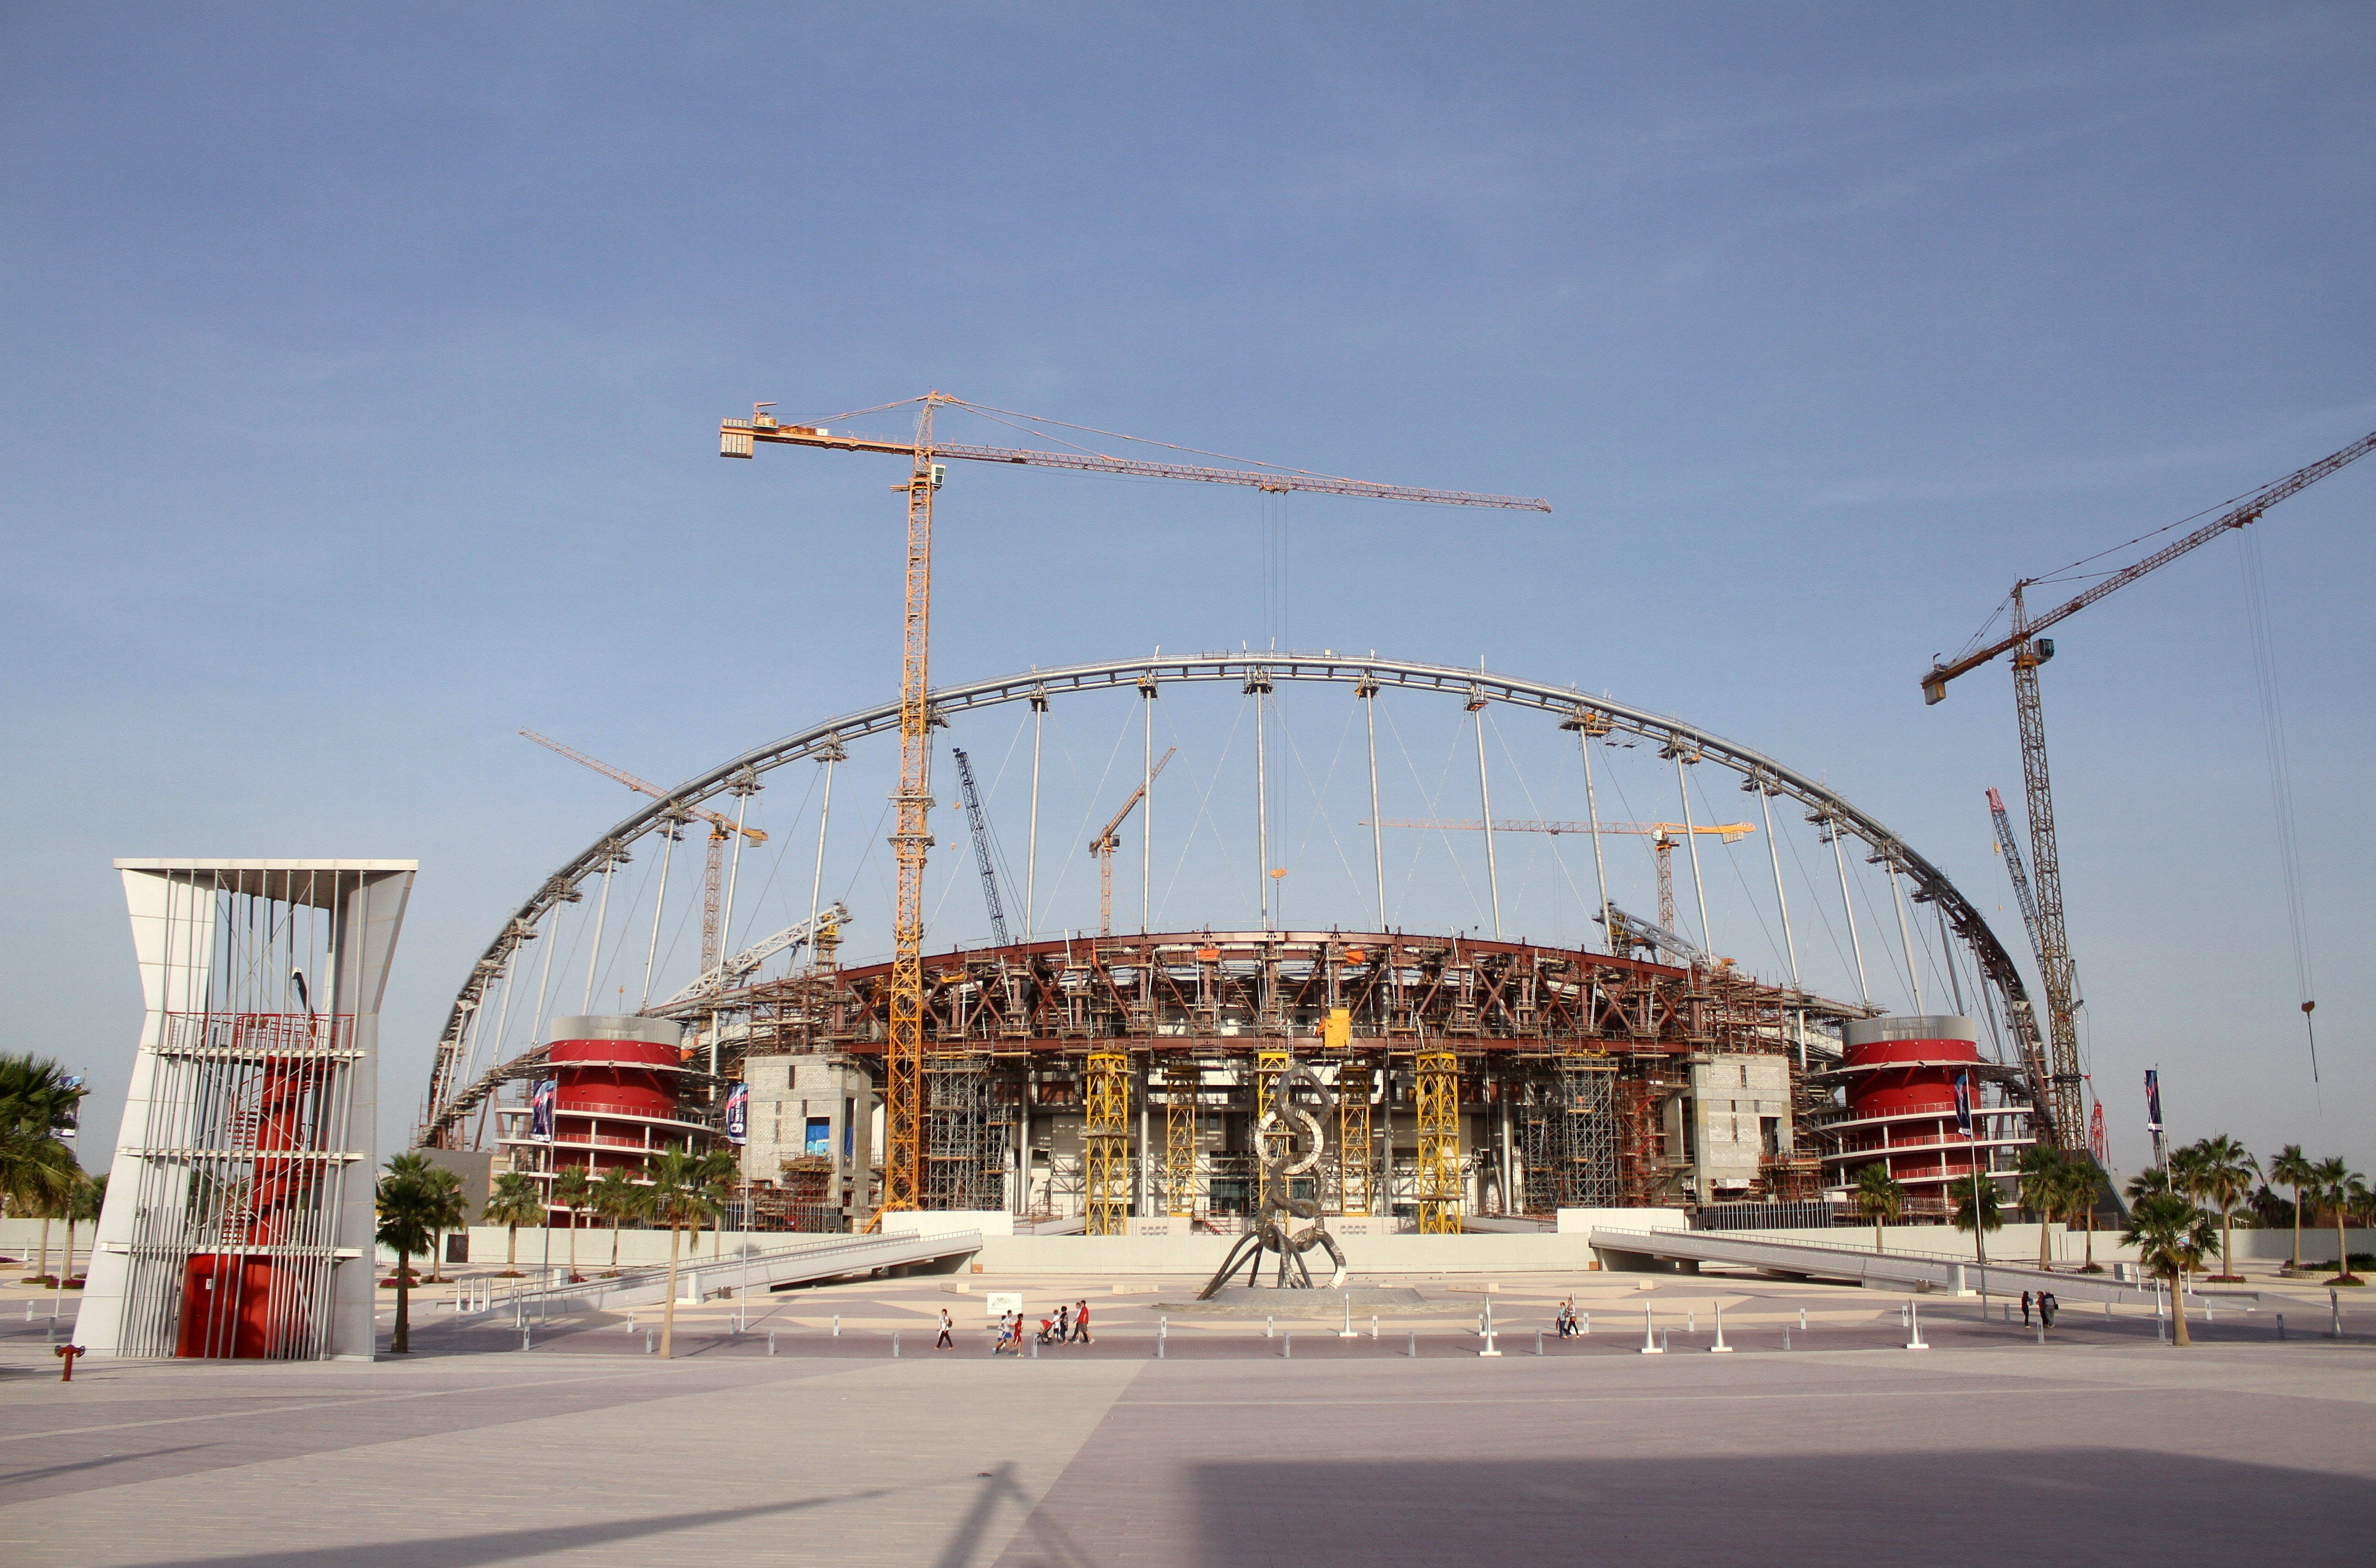 A view of the construction work at the Khalifa International Stadium in Doha